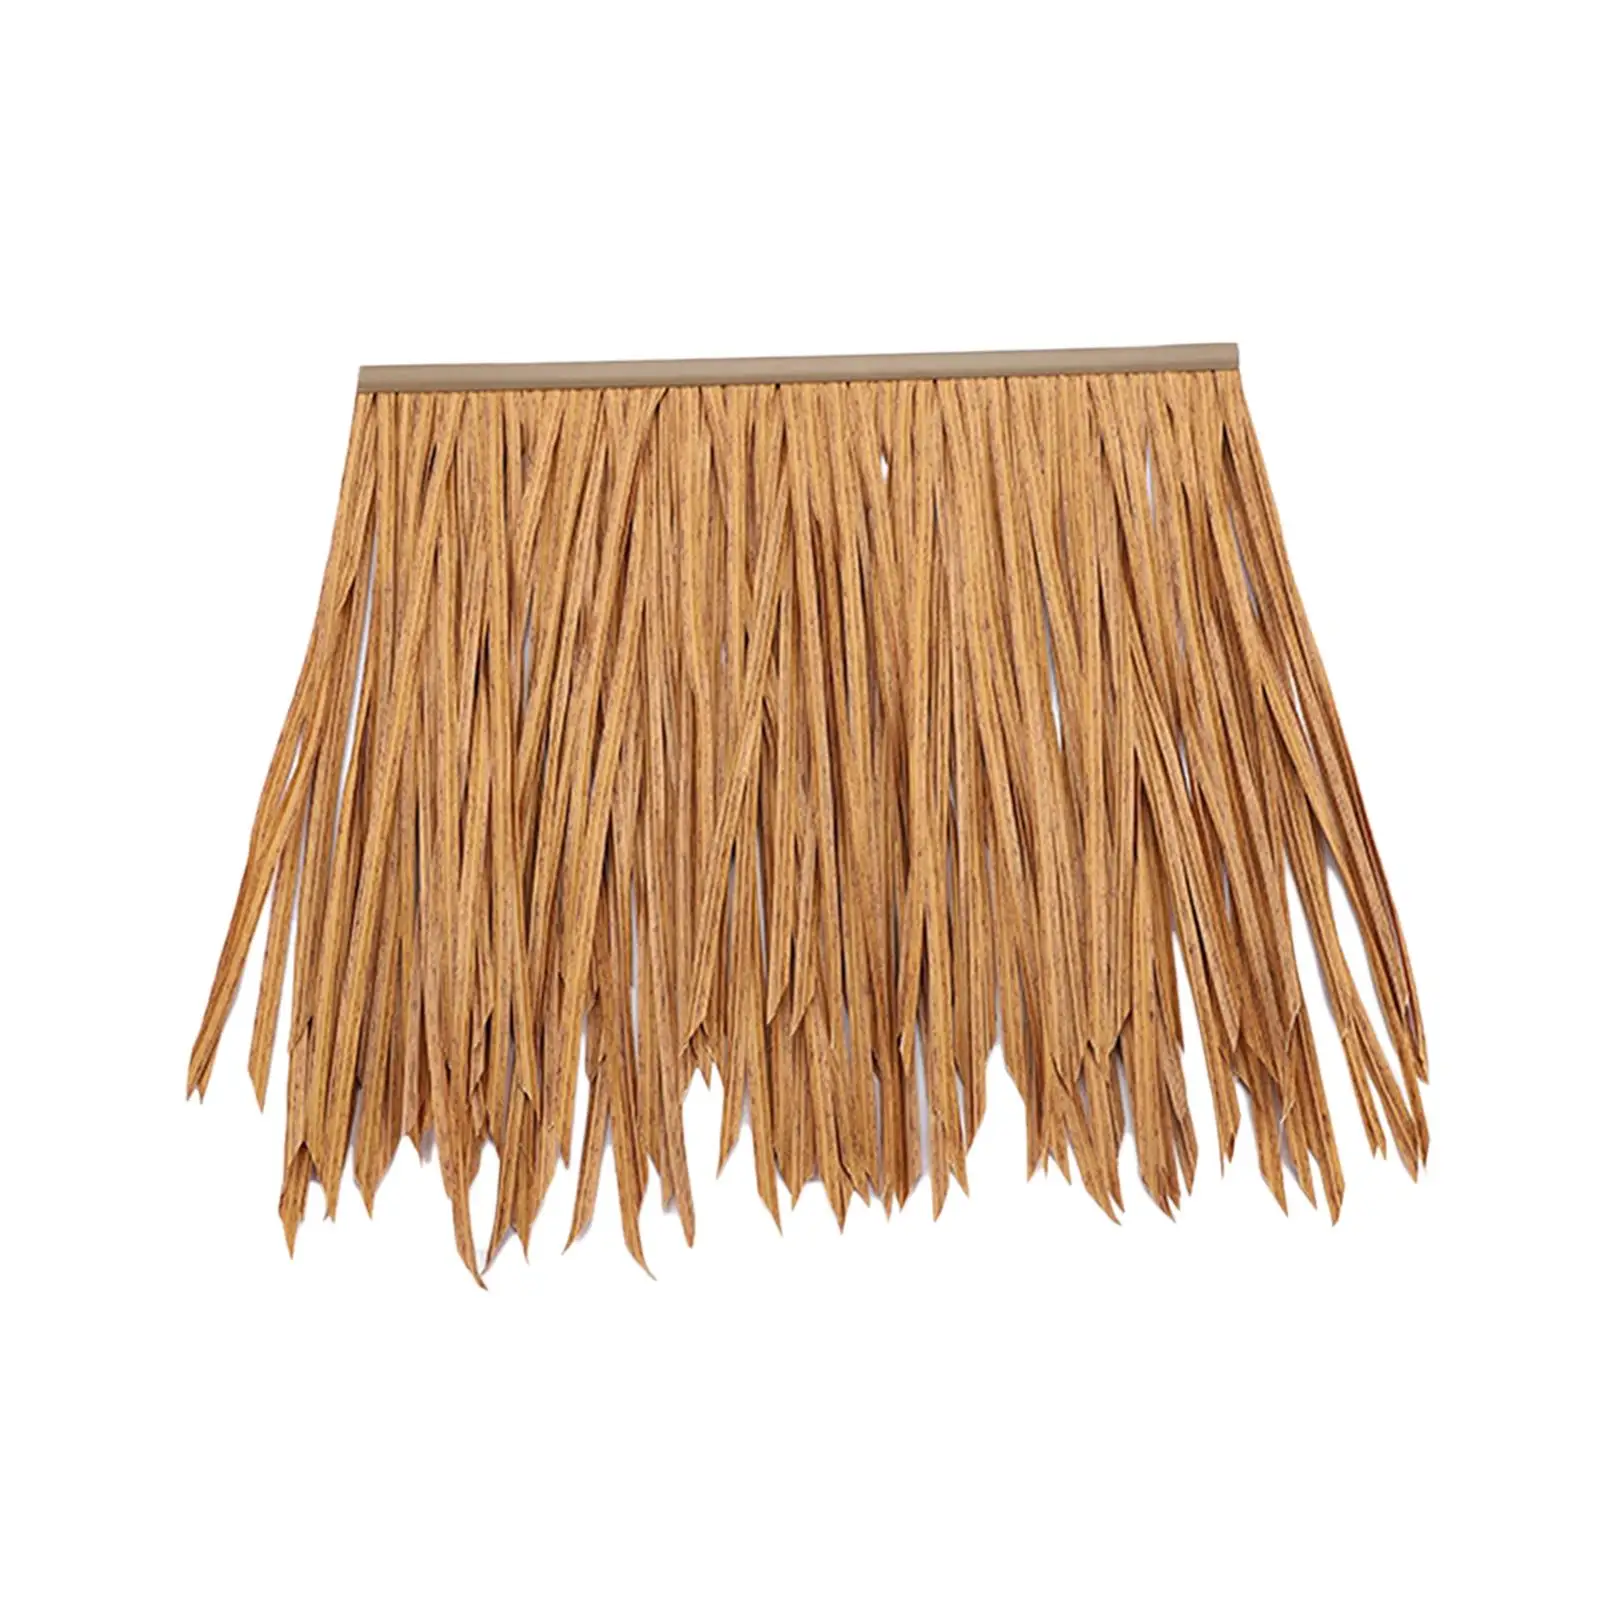 Straw Roof Thatch Decor Multi Use Universal Simple Using Accs Durable Grass Skirting Roof for Bar Outdoor Garden Pavilion Patio